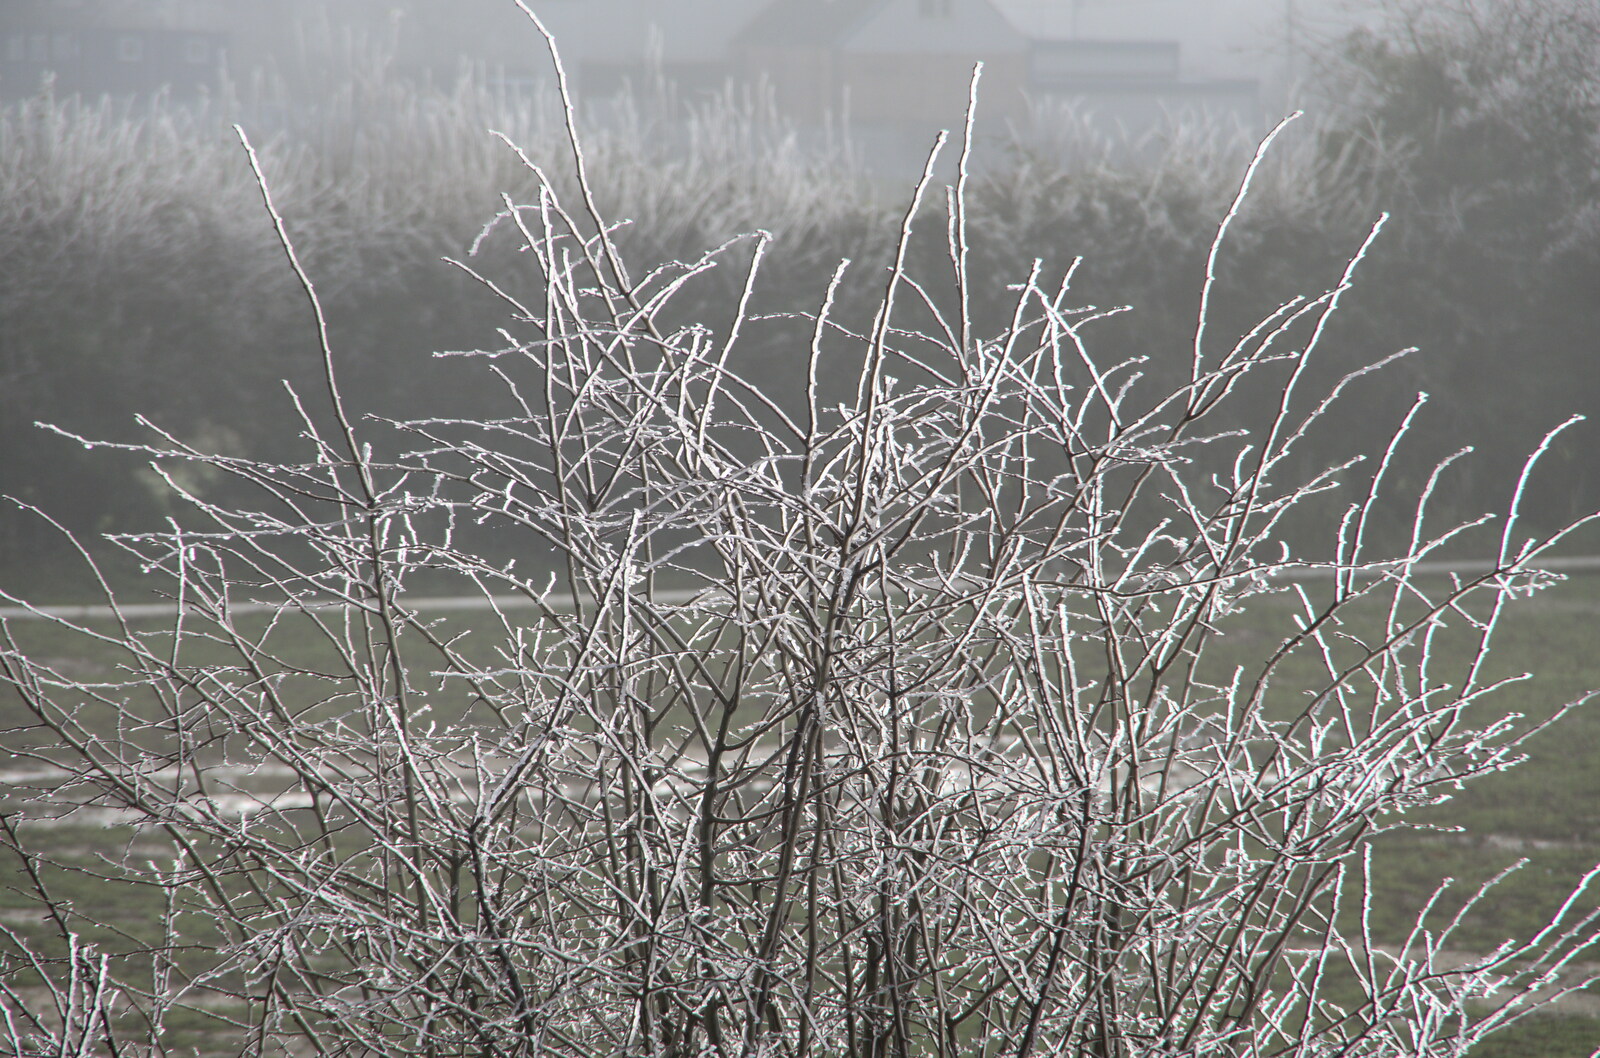 A frosty bush from A Return to the Oaksmere, Brome, Suffolk - 8th December 2020